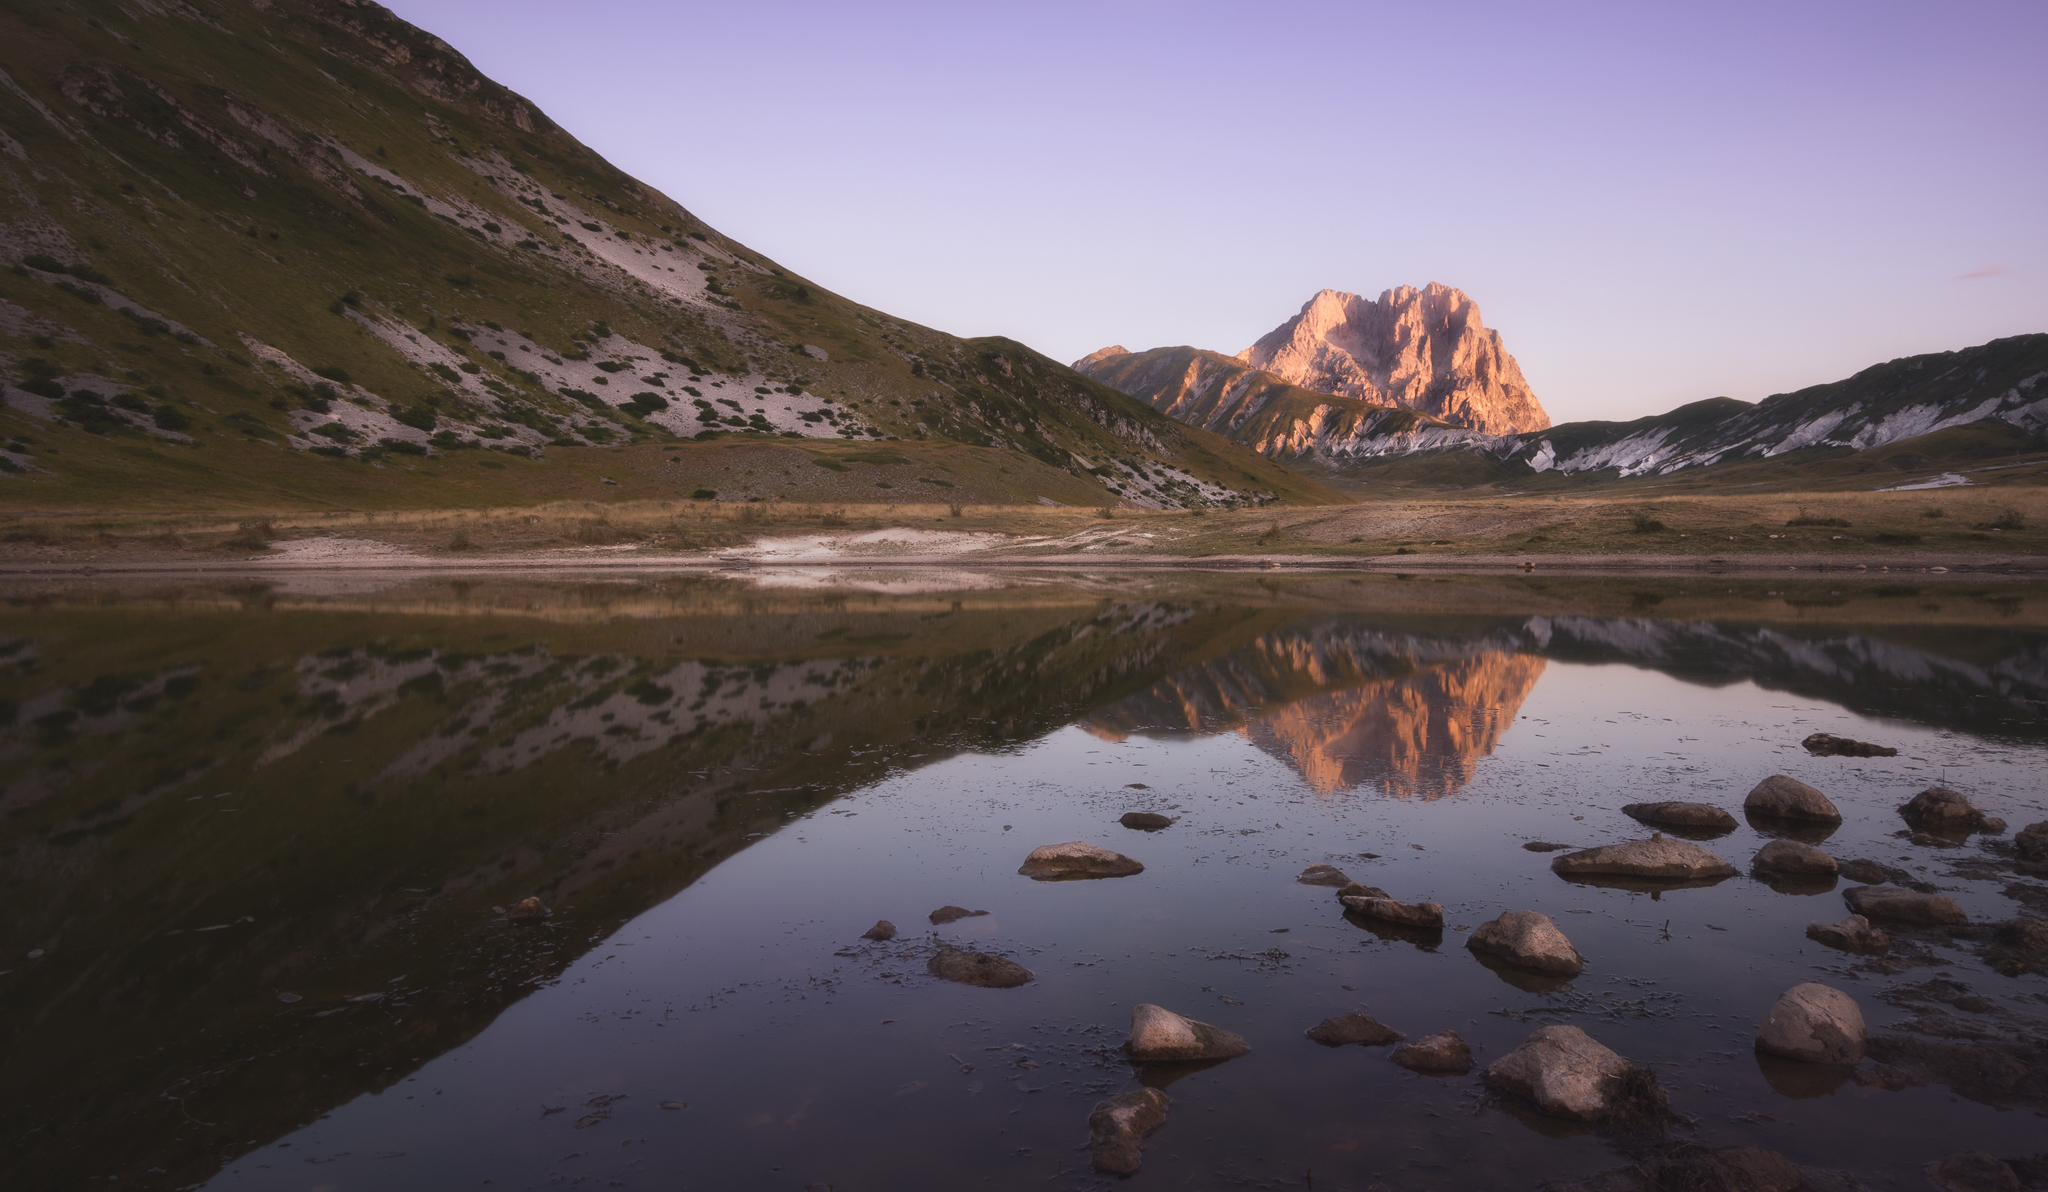 The Gran Sasso is mirrored...